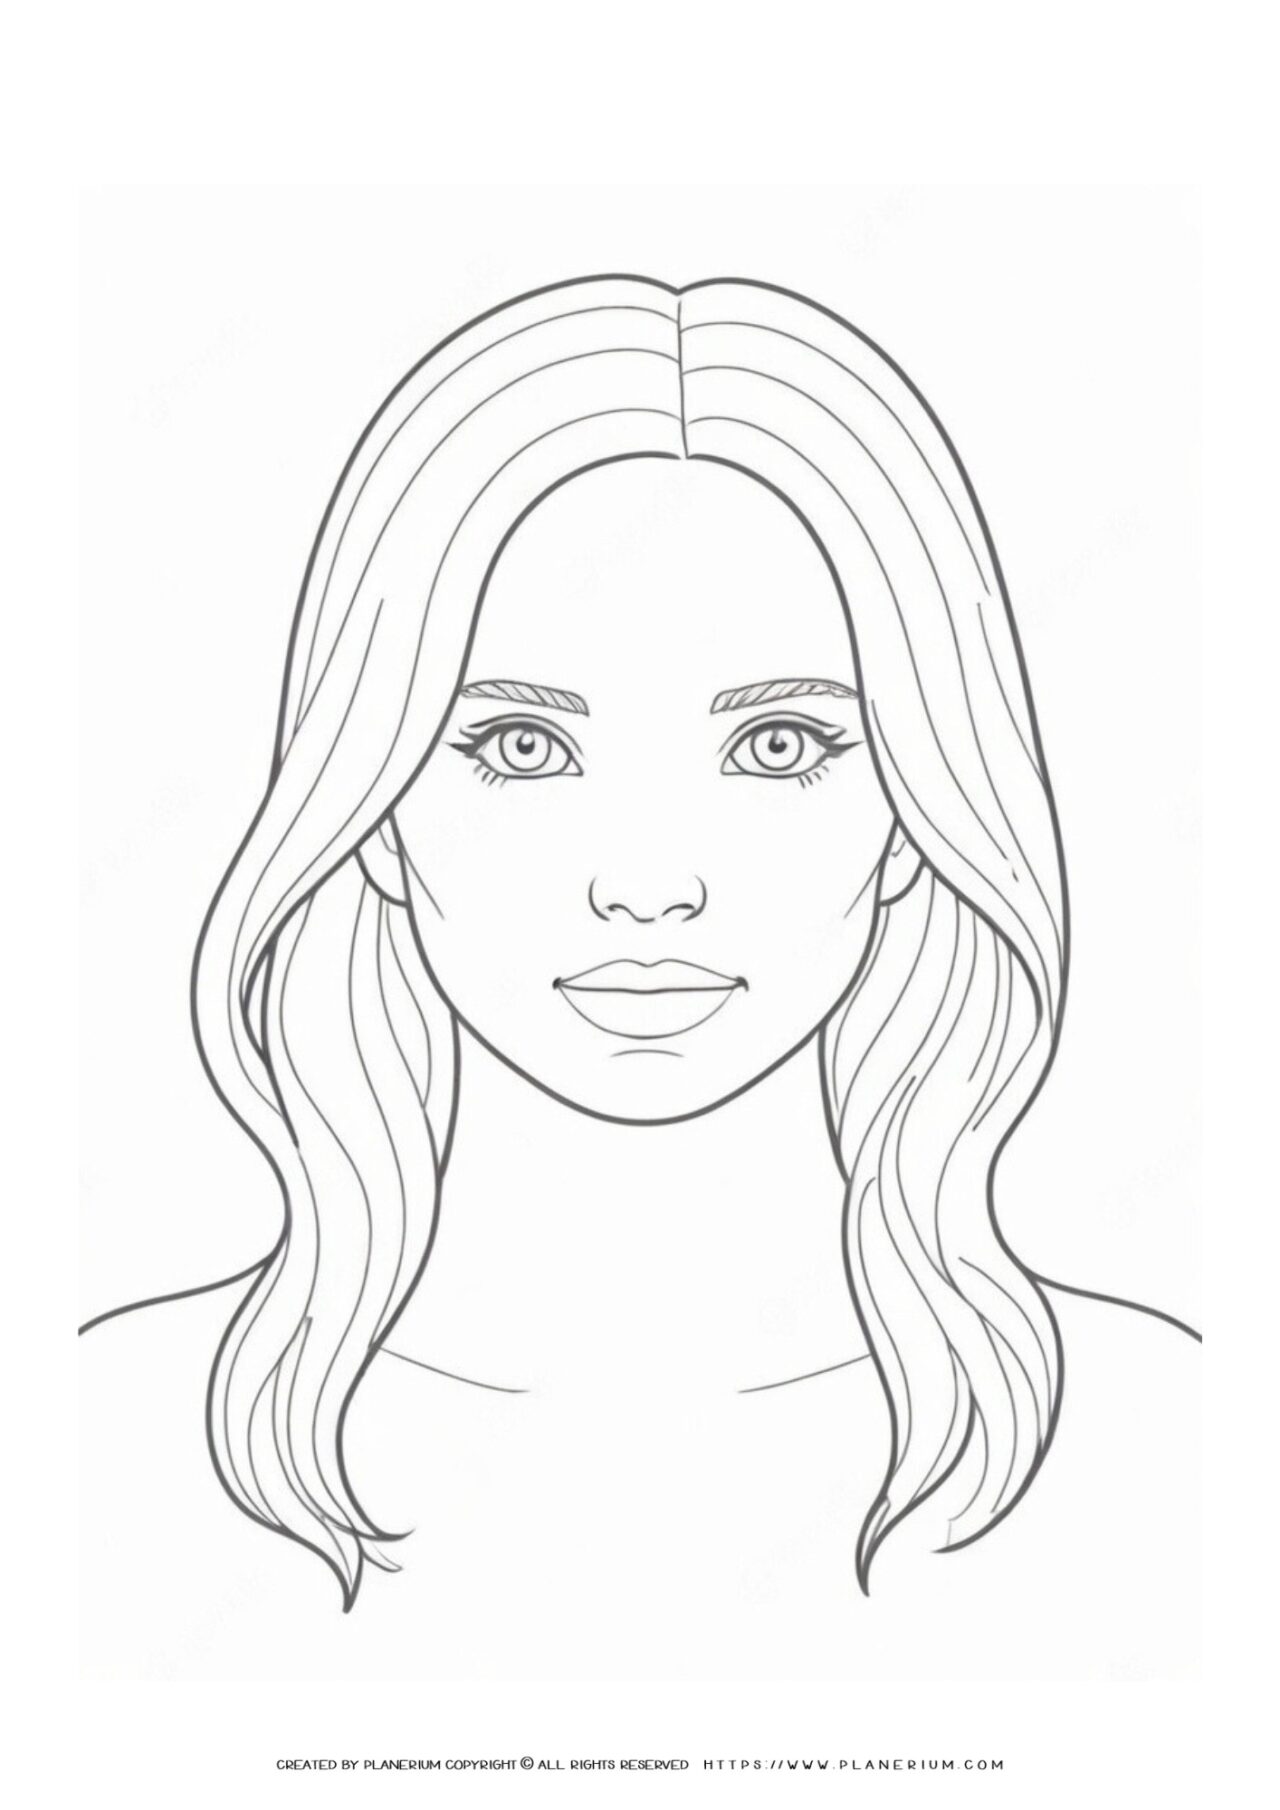 Line drawing of a woman's face with flowing hair.